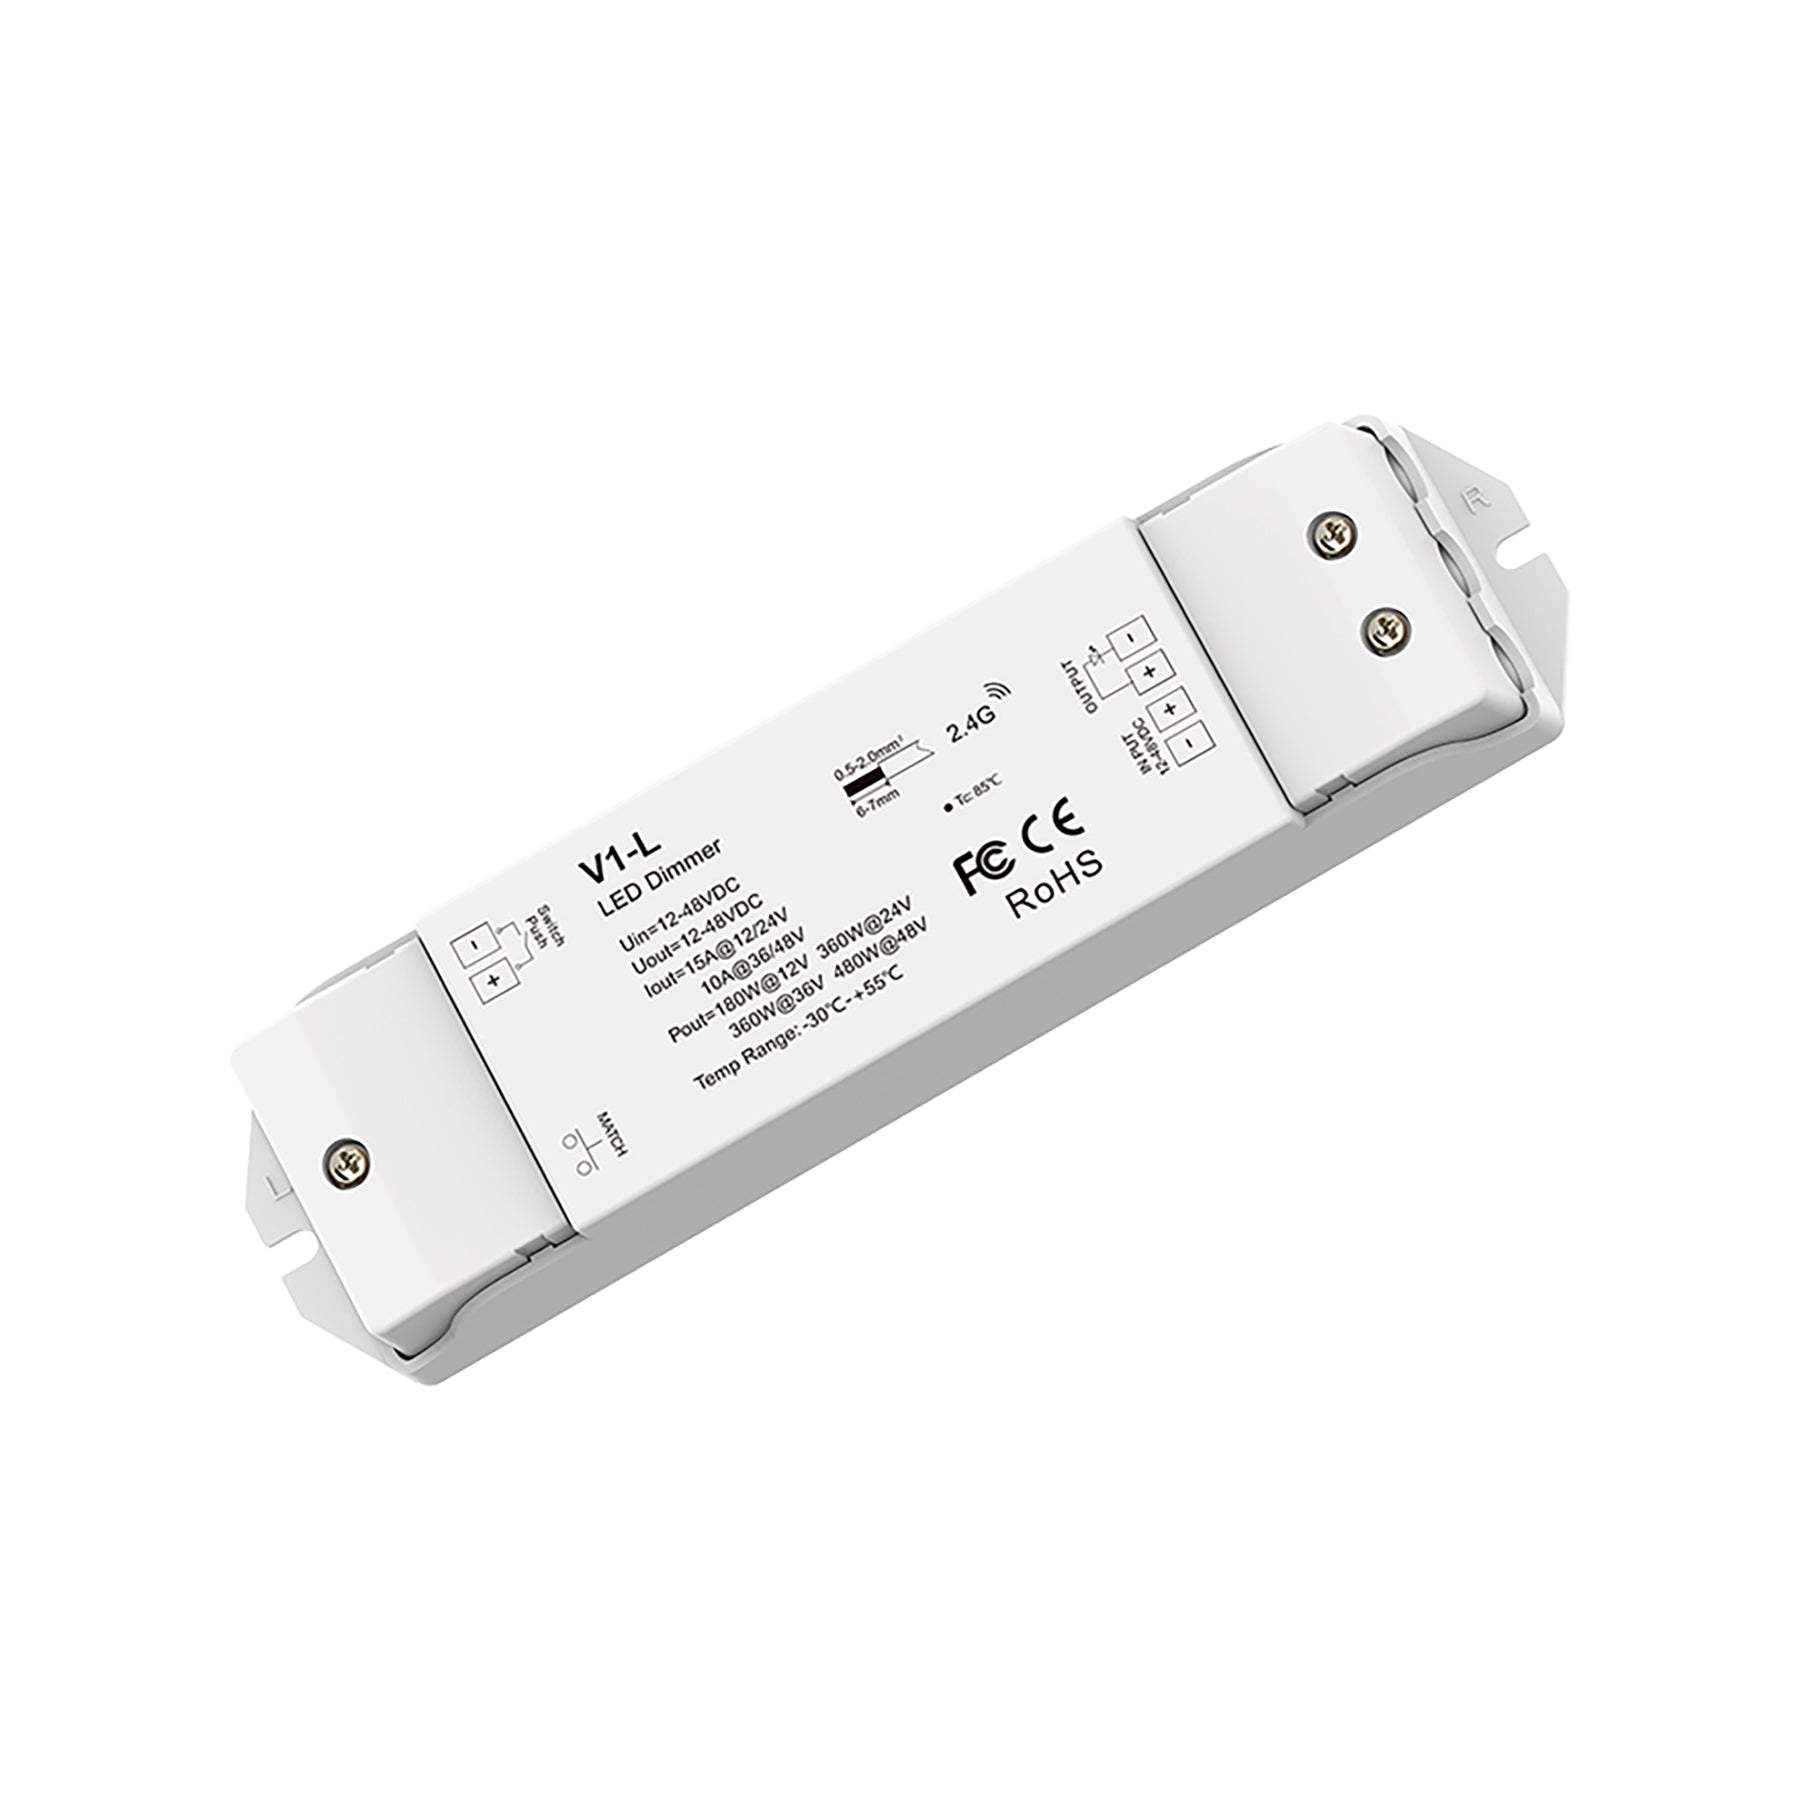 G.W.S. LED LED 12-48V DC Dimming Controller V1-L + 4 Zone Remote Control RT6